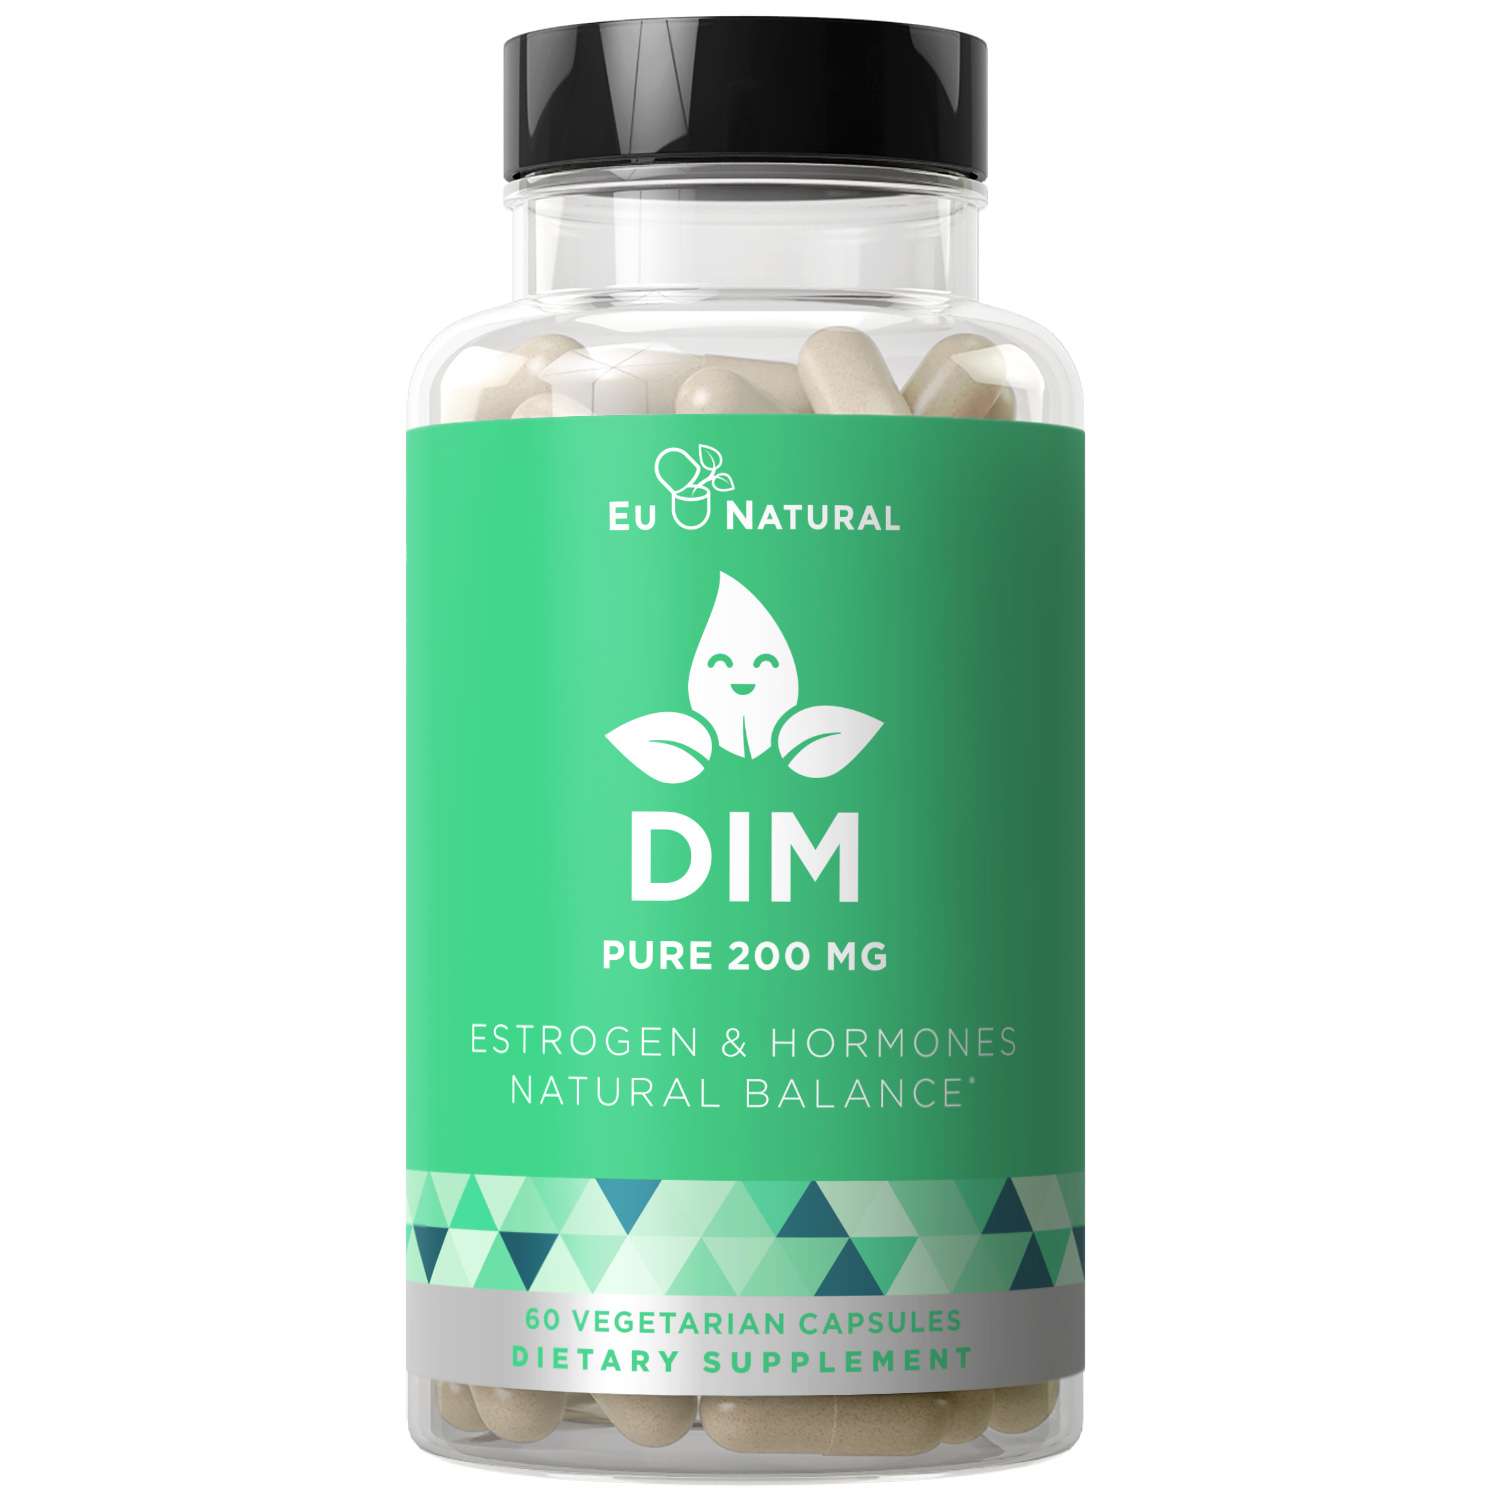 DIM Supplement Pure 200 MG